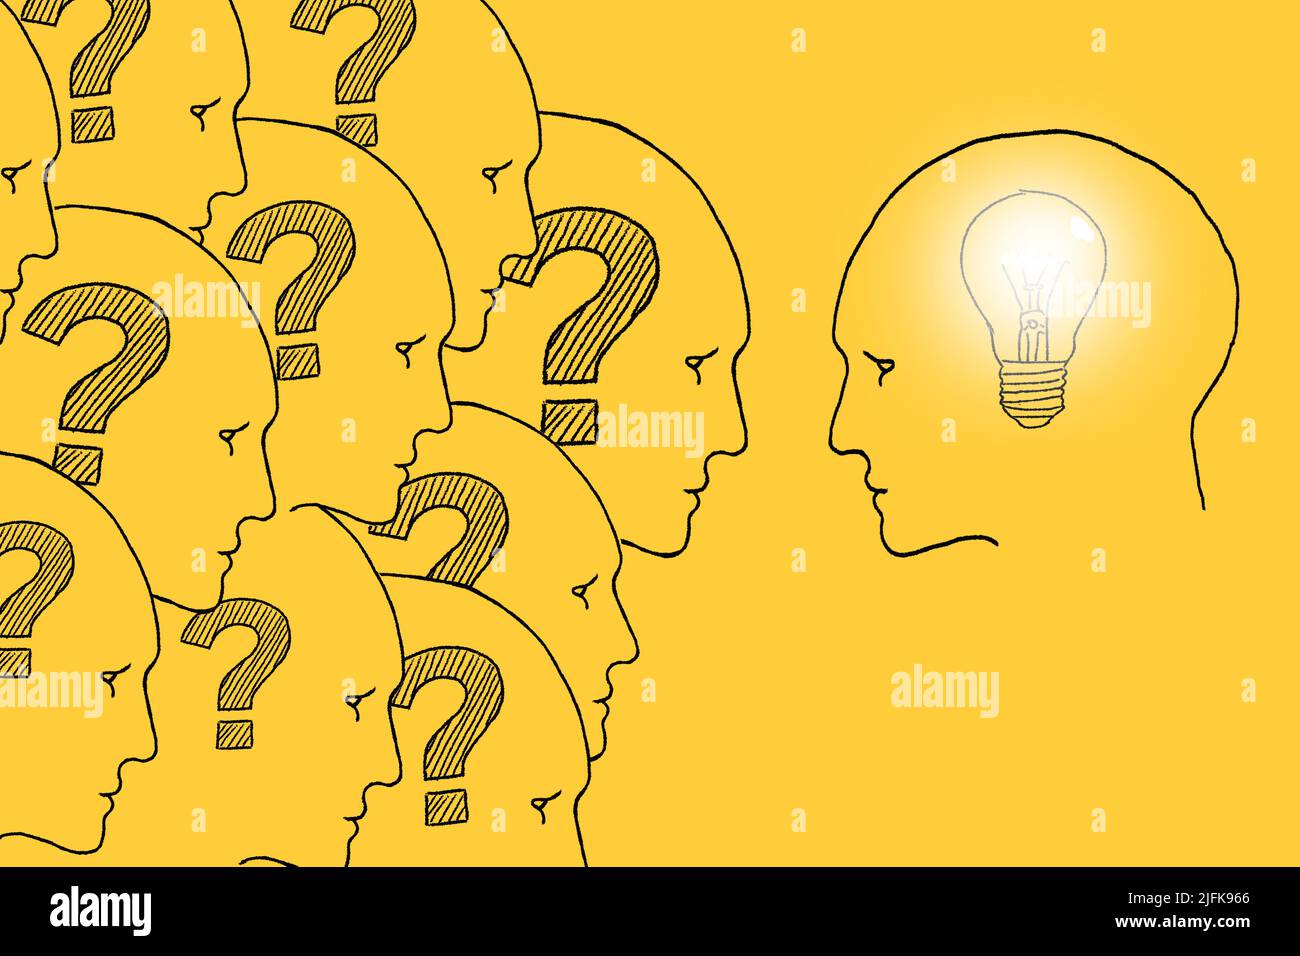 Human heads with question marks inside and one head with light bulb inside. Illustration on yellow. Idea generation, FAQ Stock Photo